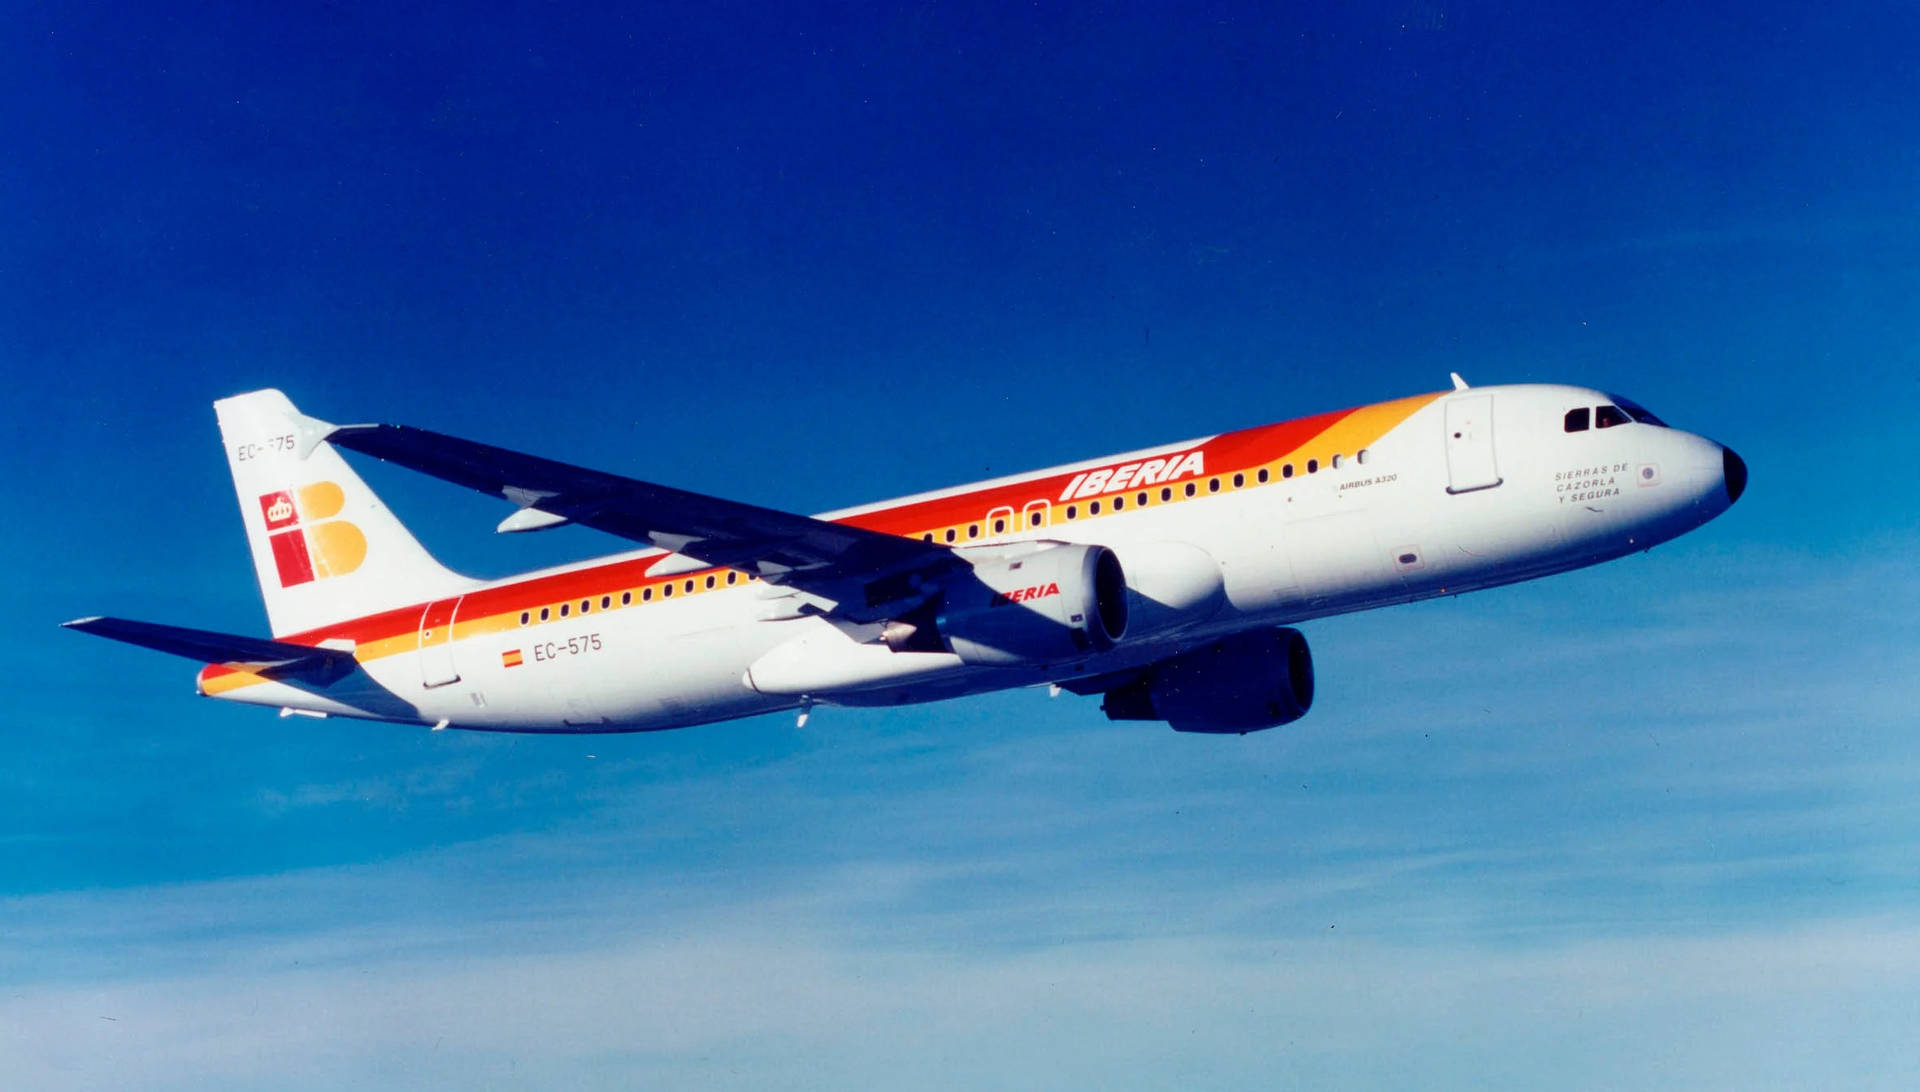 Iberia Airlines Airplane In The Blue Sky Wallpaper